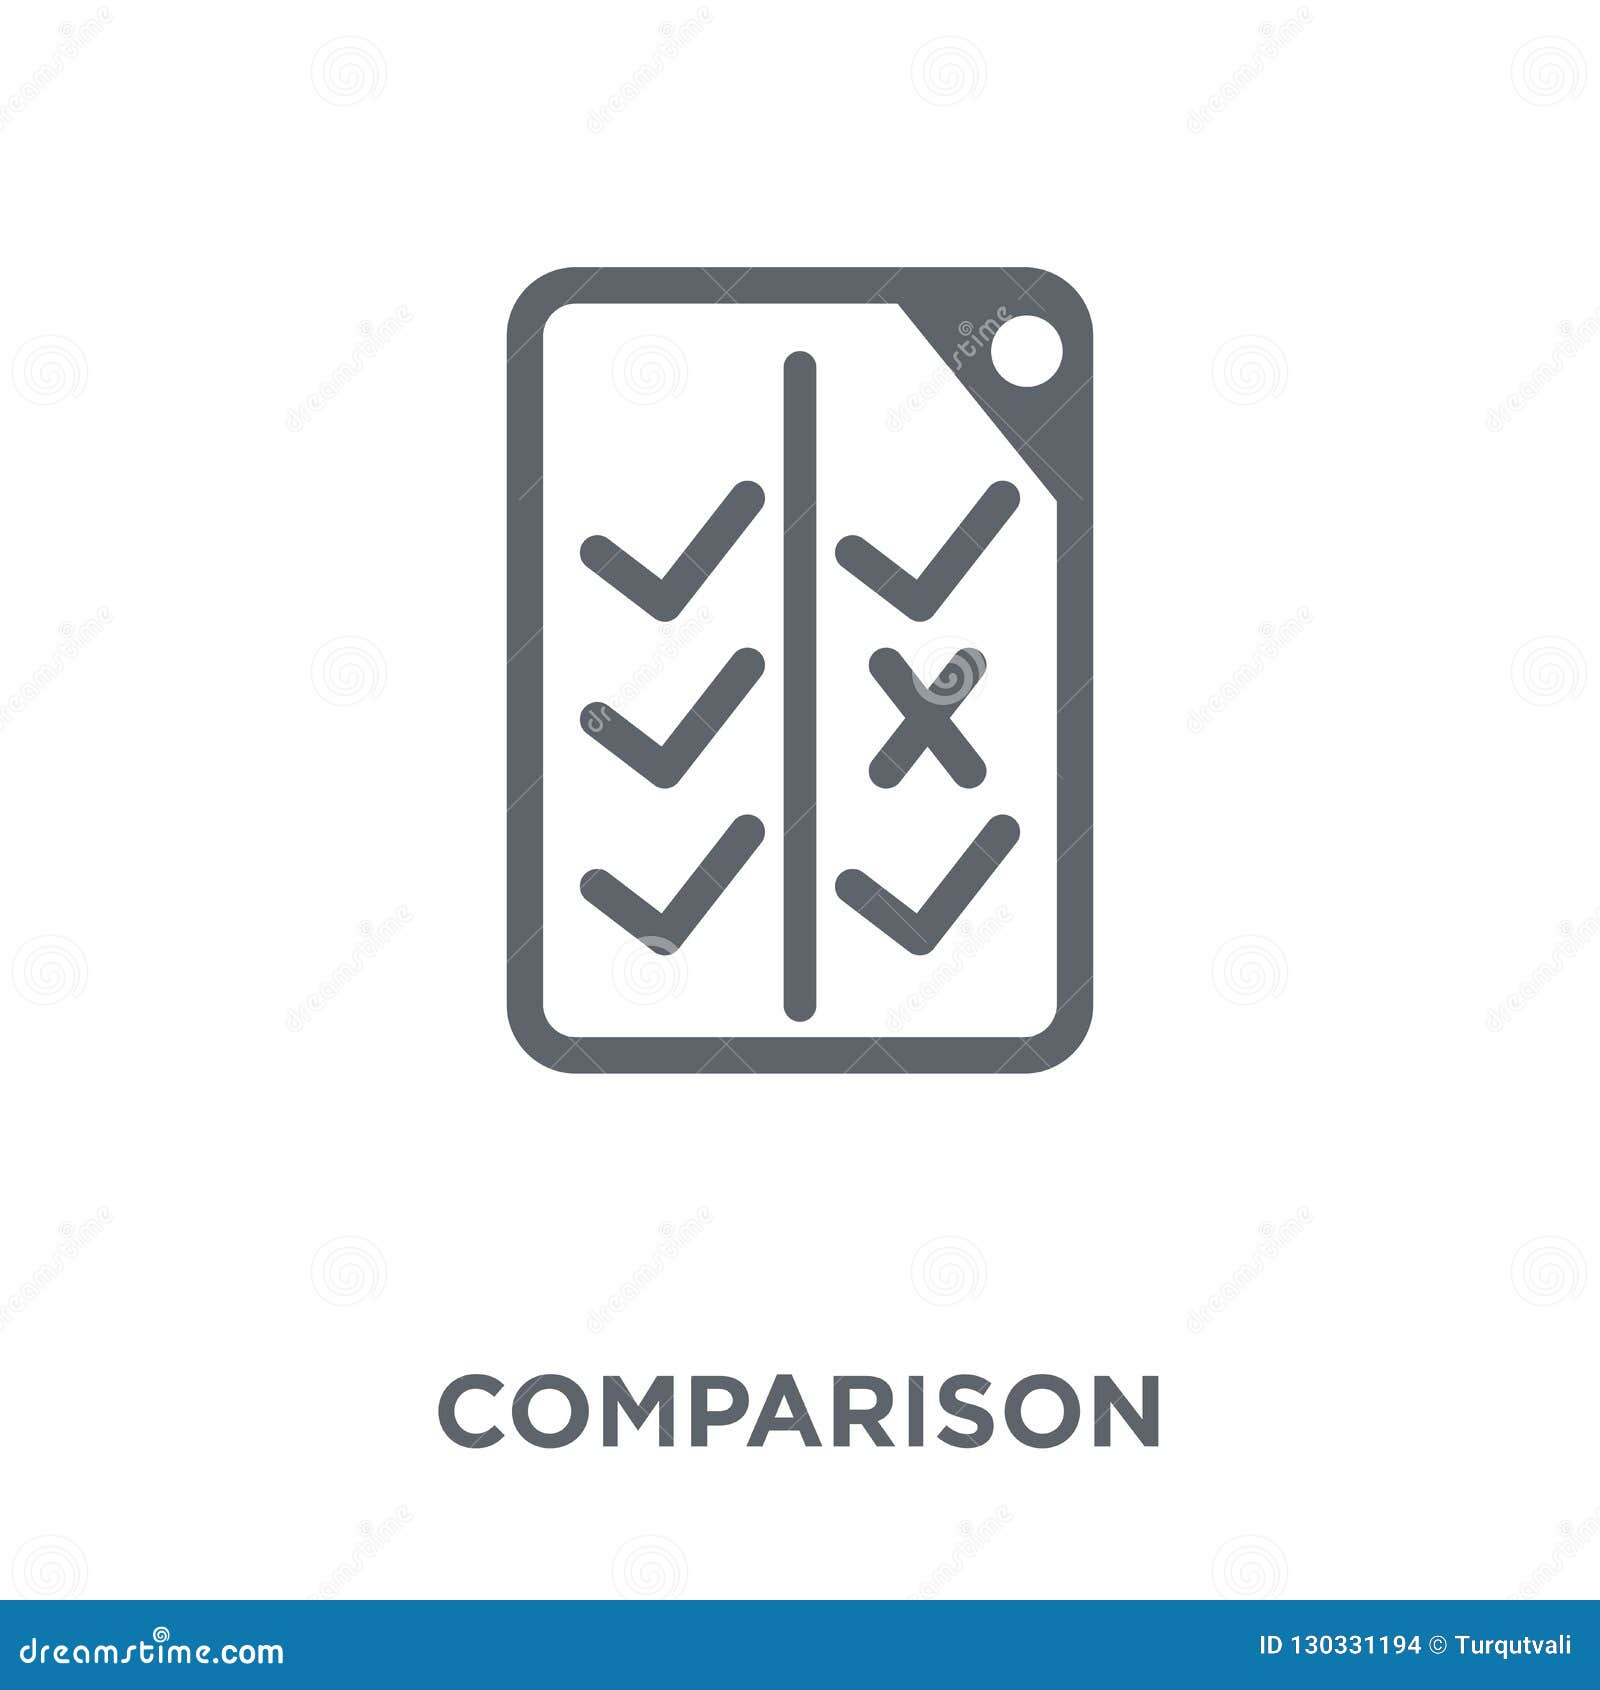 comparison icon from startup collection.